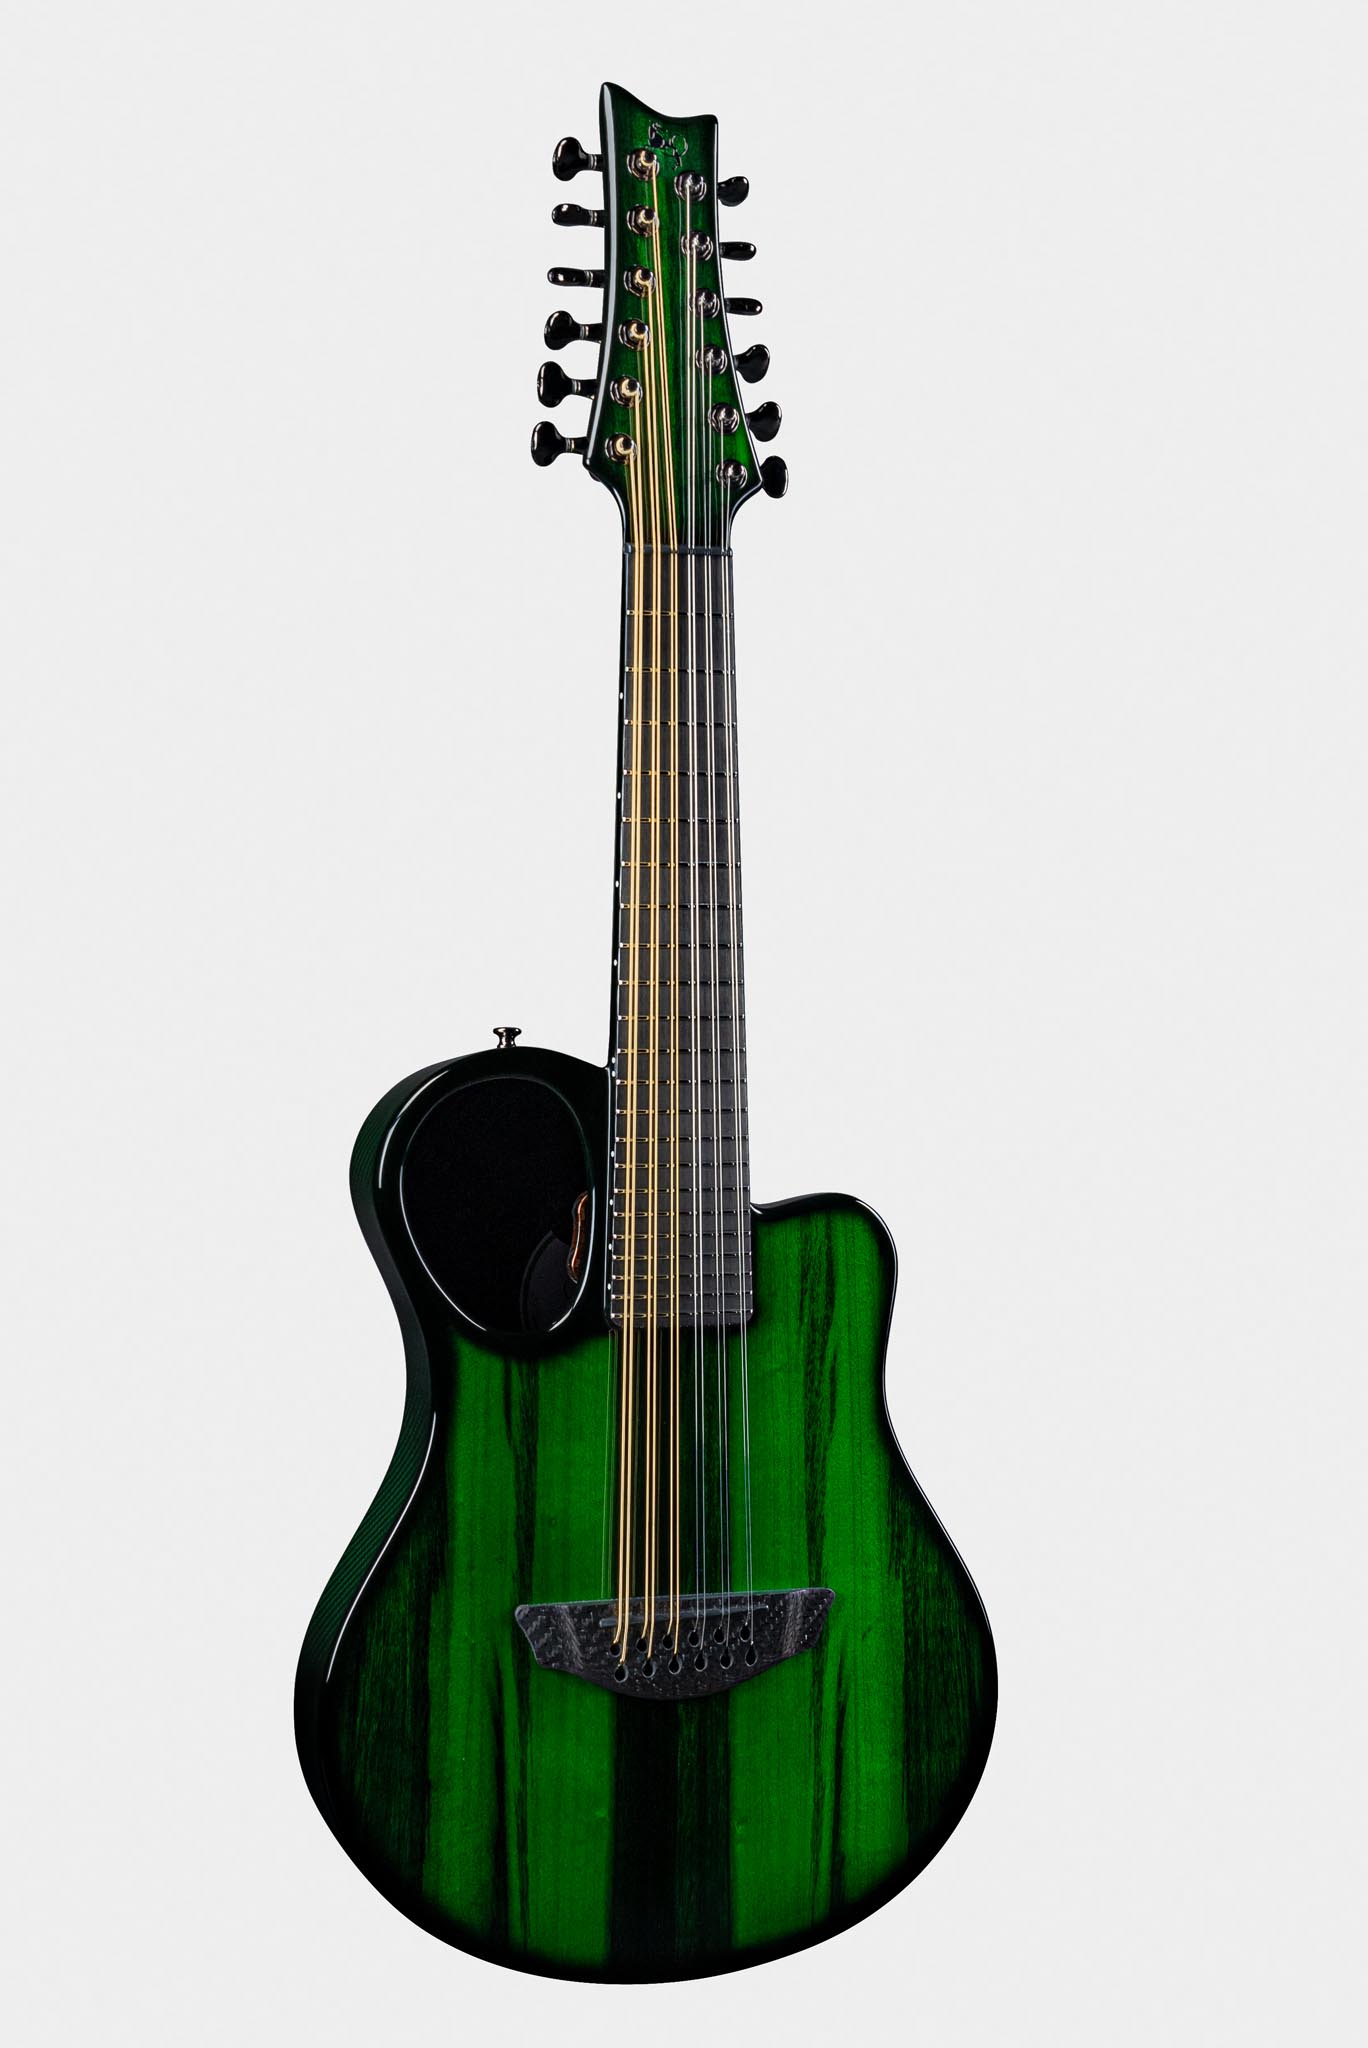 Emerald Guitars Amicus model with striking green finish and carbon fiber body